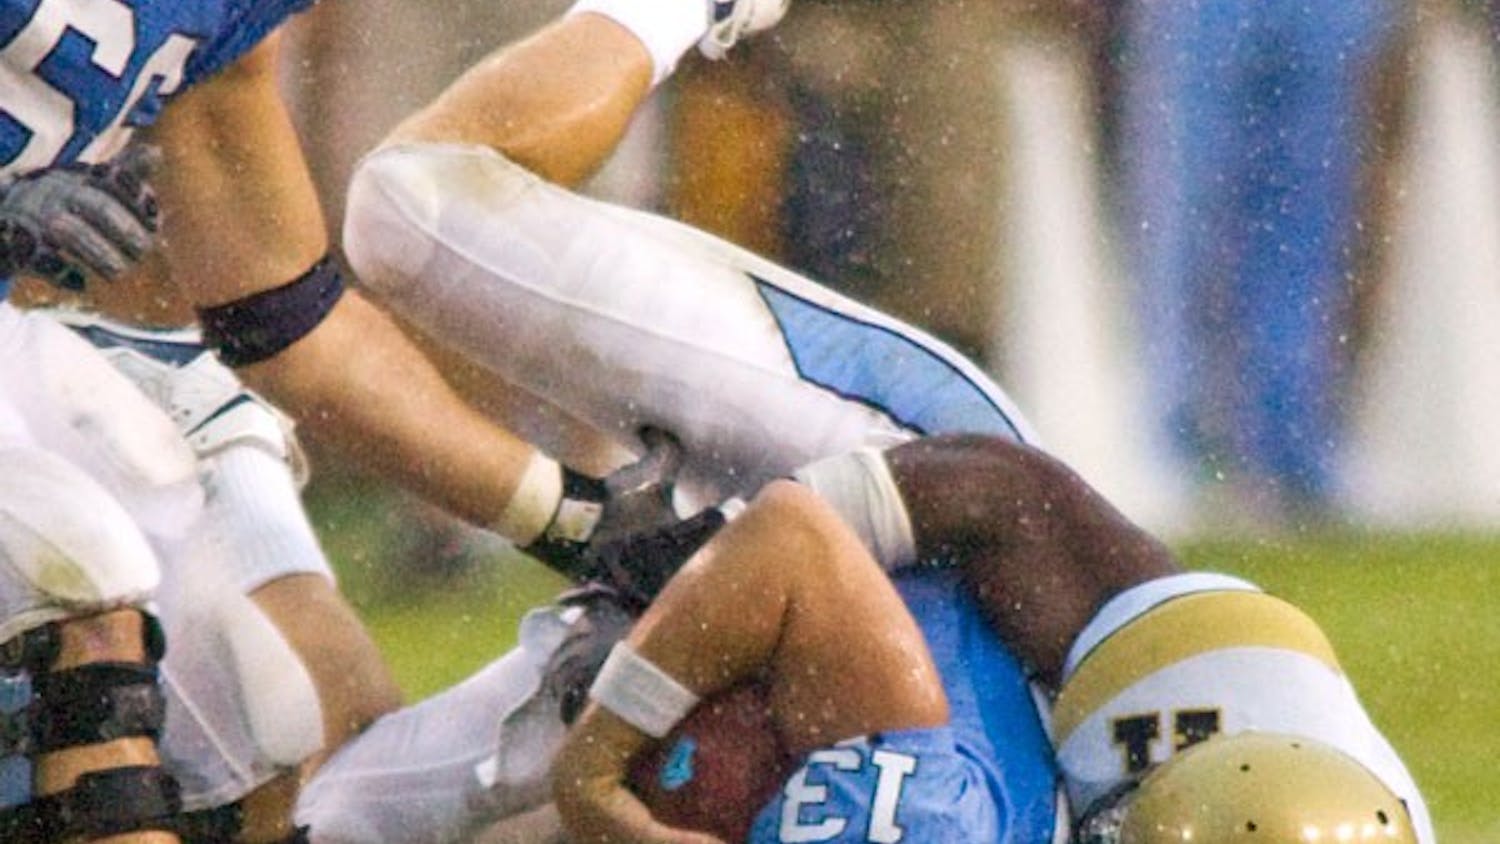 Quarterback TJ Yates gets sacked in the fourth quarter of Carolina's 7 to 24 loss to Georgia Tech. DTH/Andrew Dye